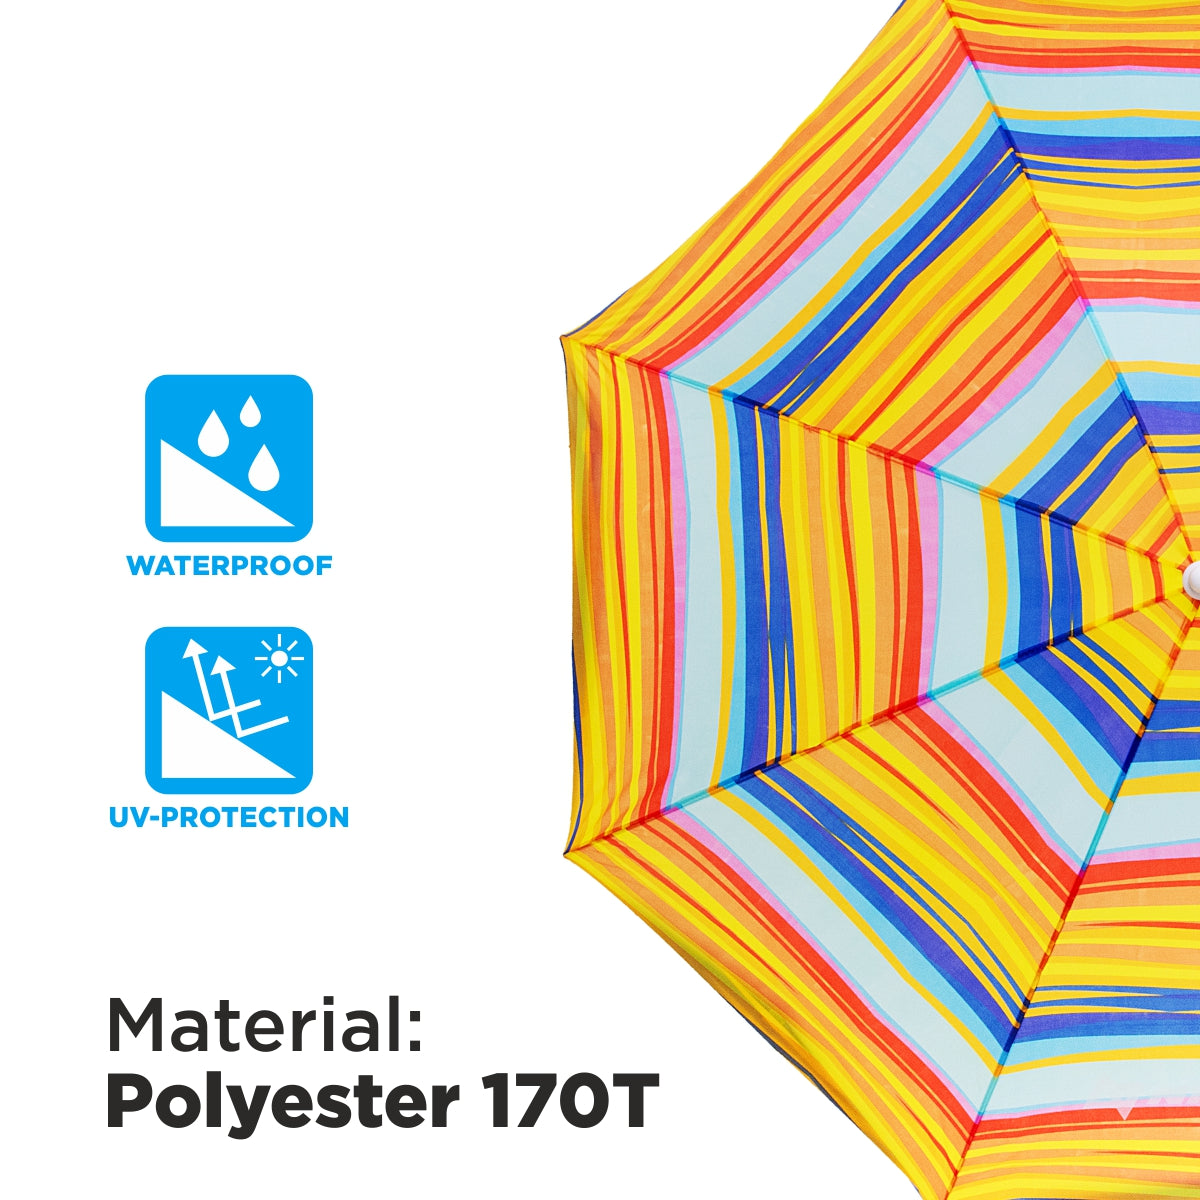 Nisus folding beach umbrella made of waterproof 170 T polyester provides you with UV protection